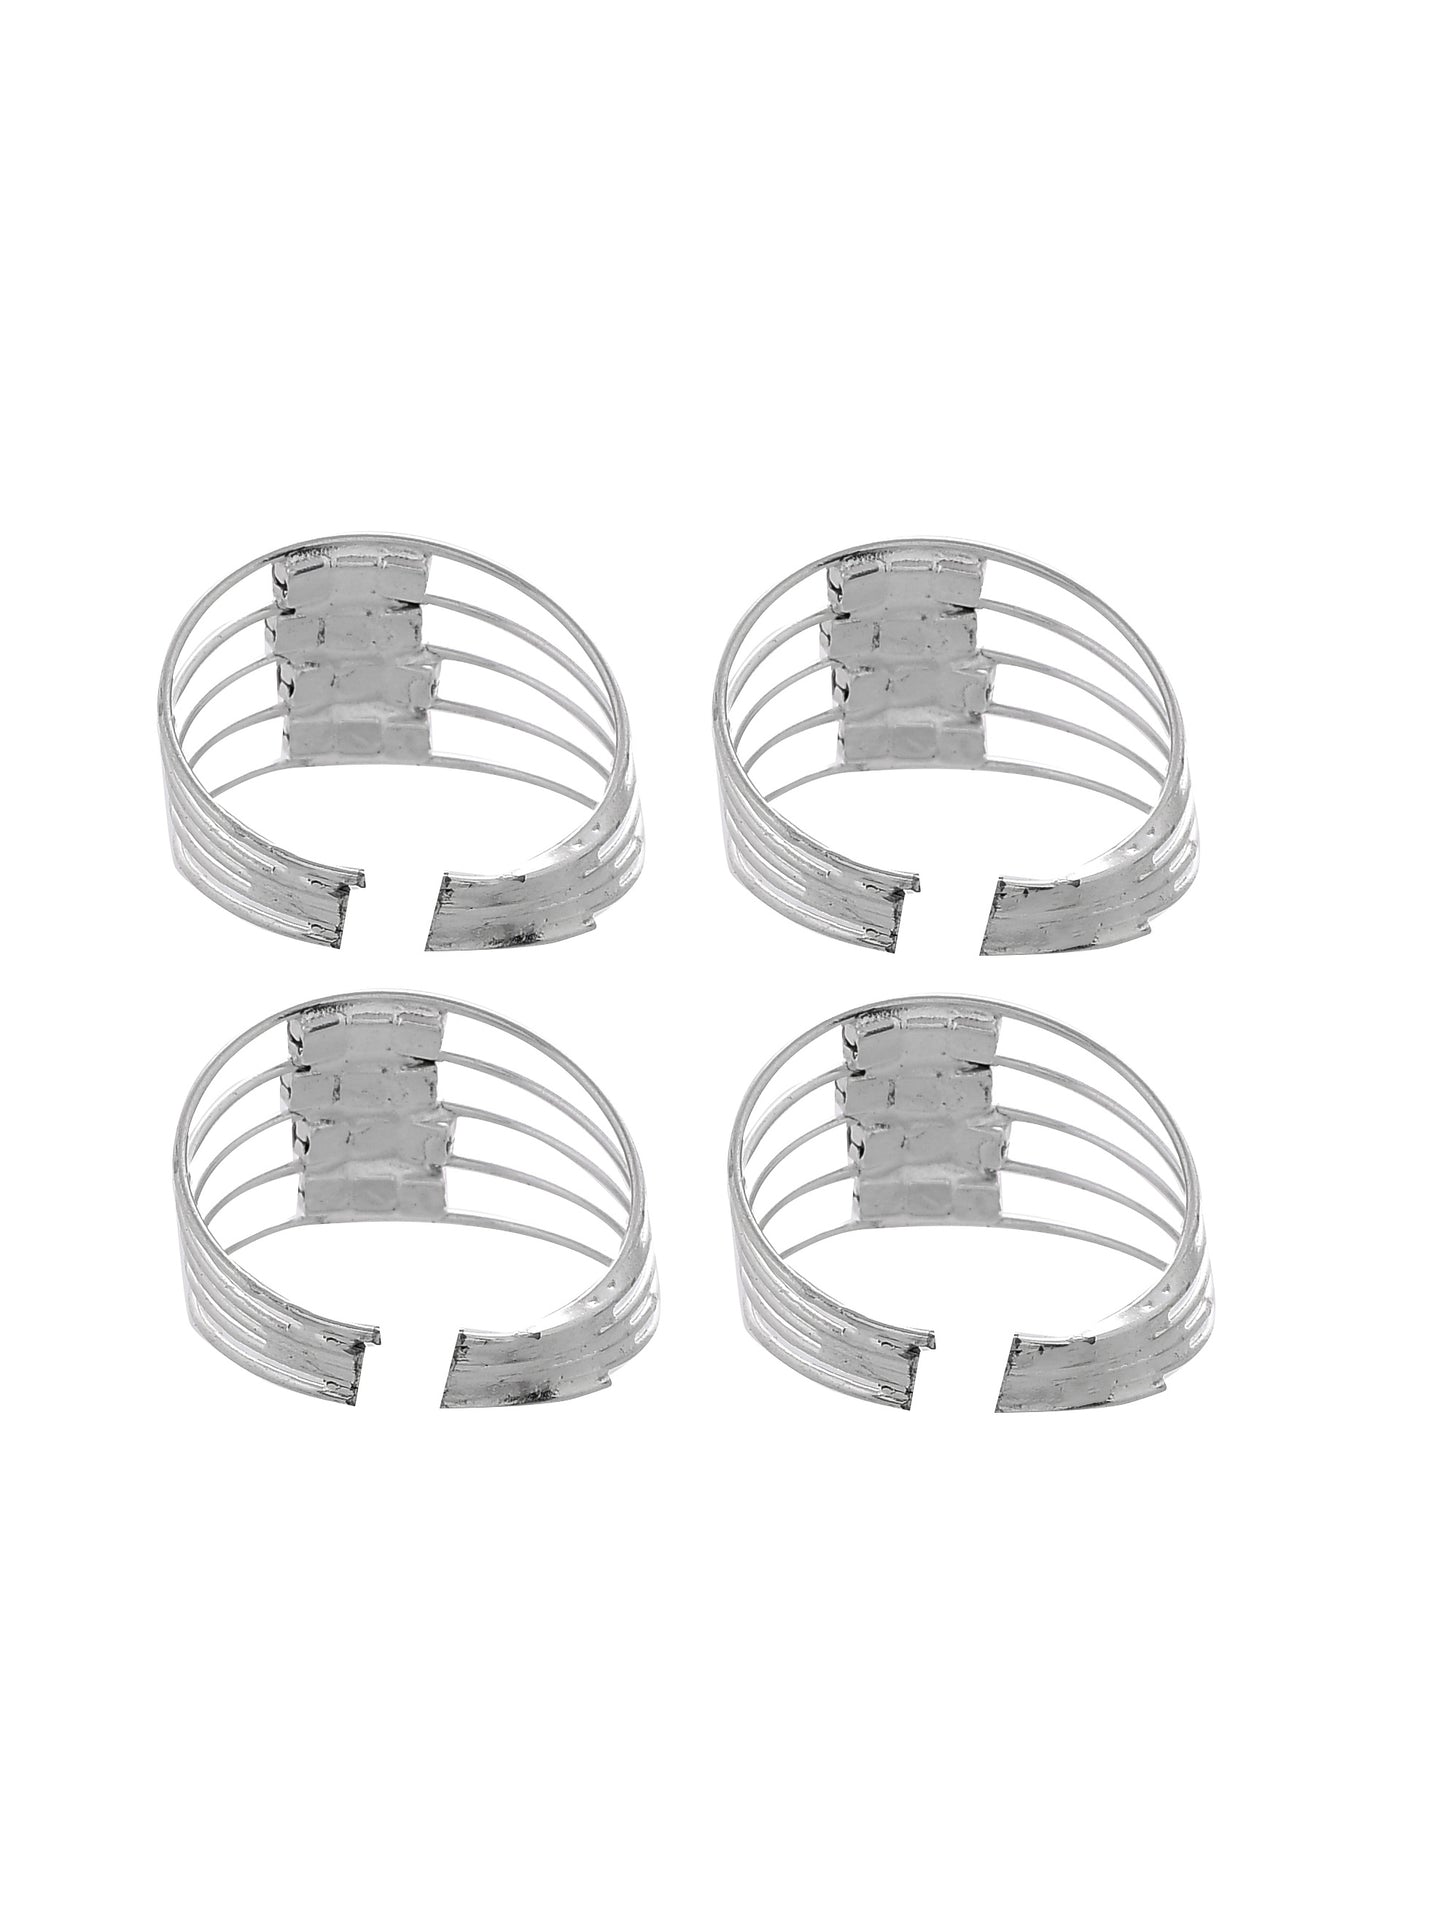 Set of 2 Silver Plated Everyday Wear Toe ring